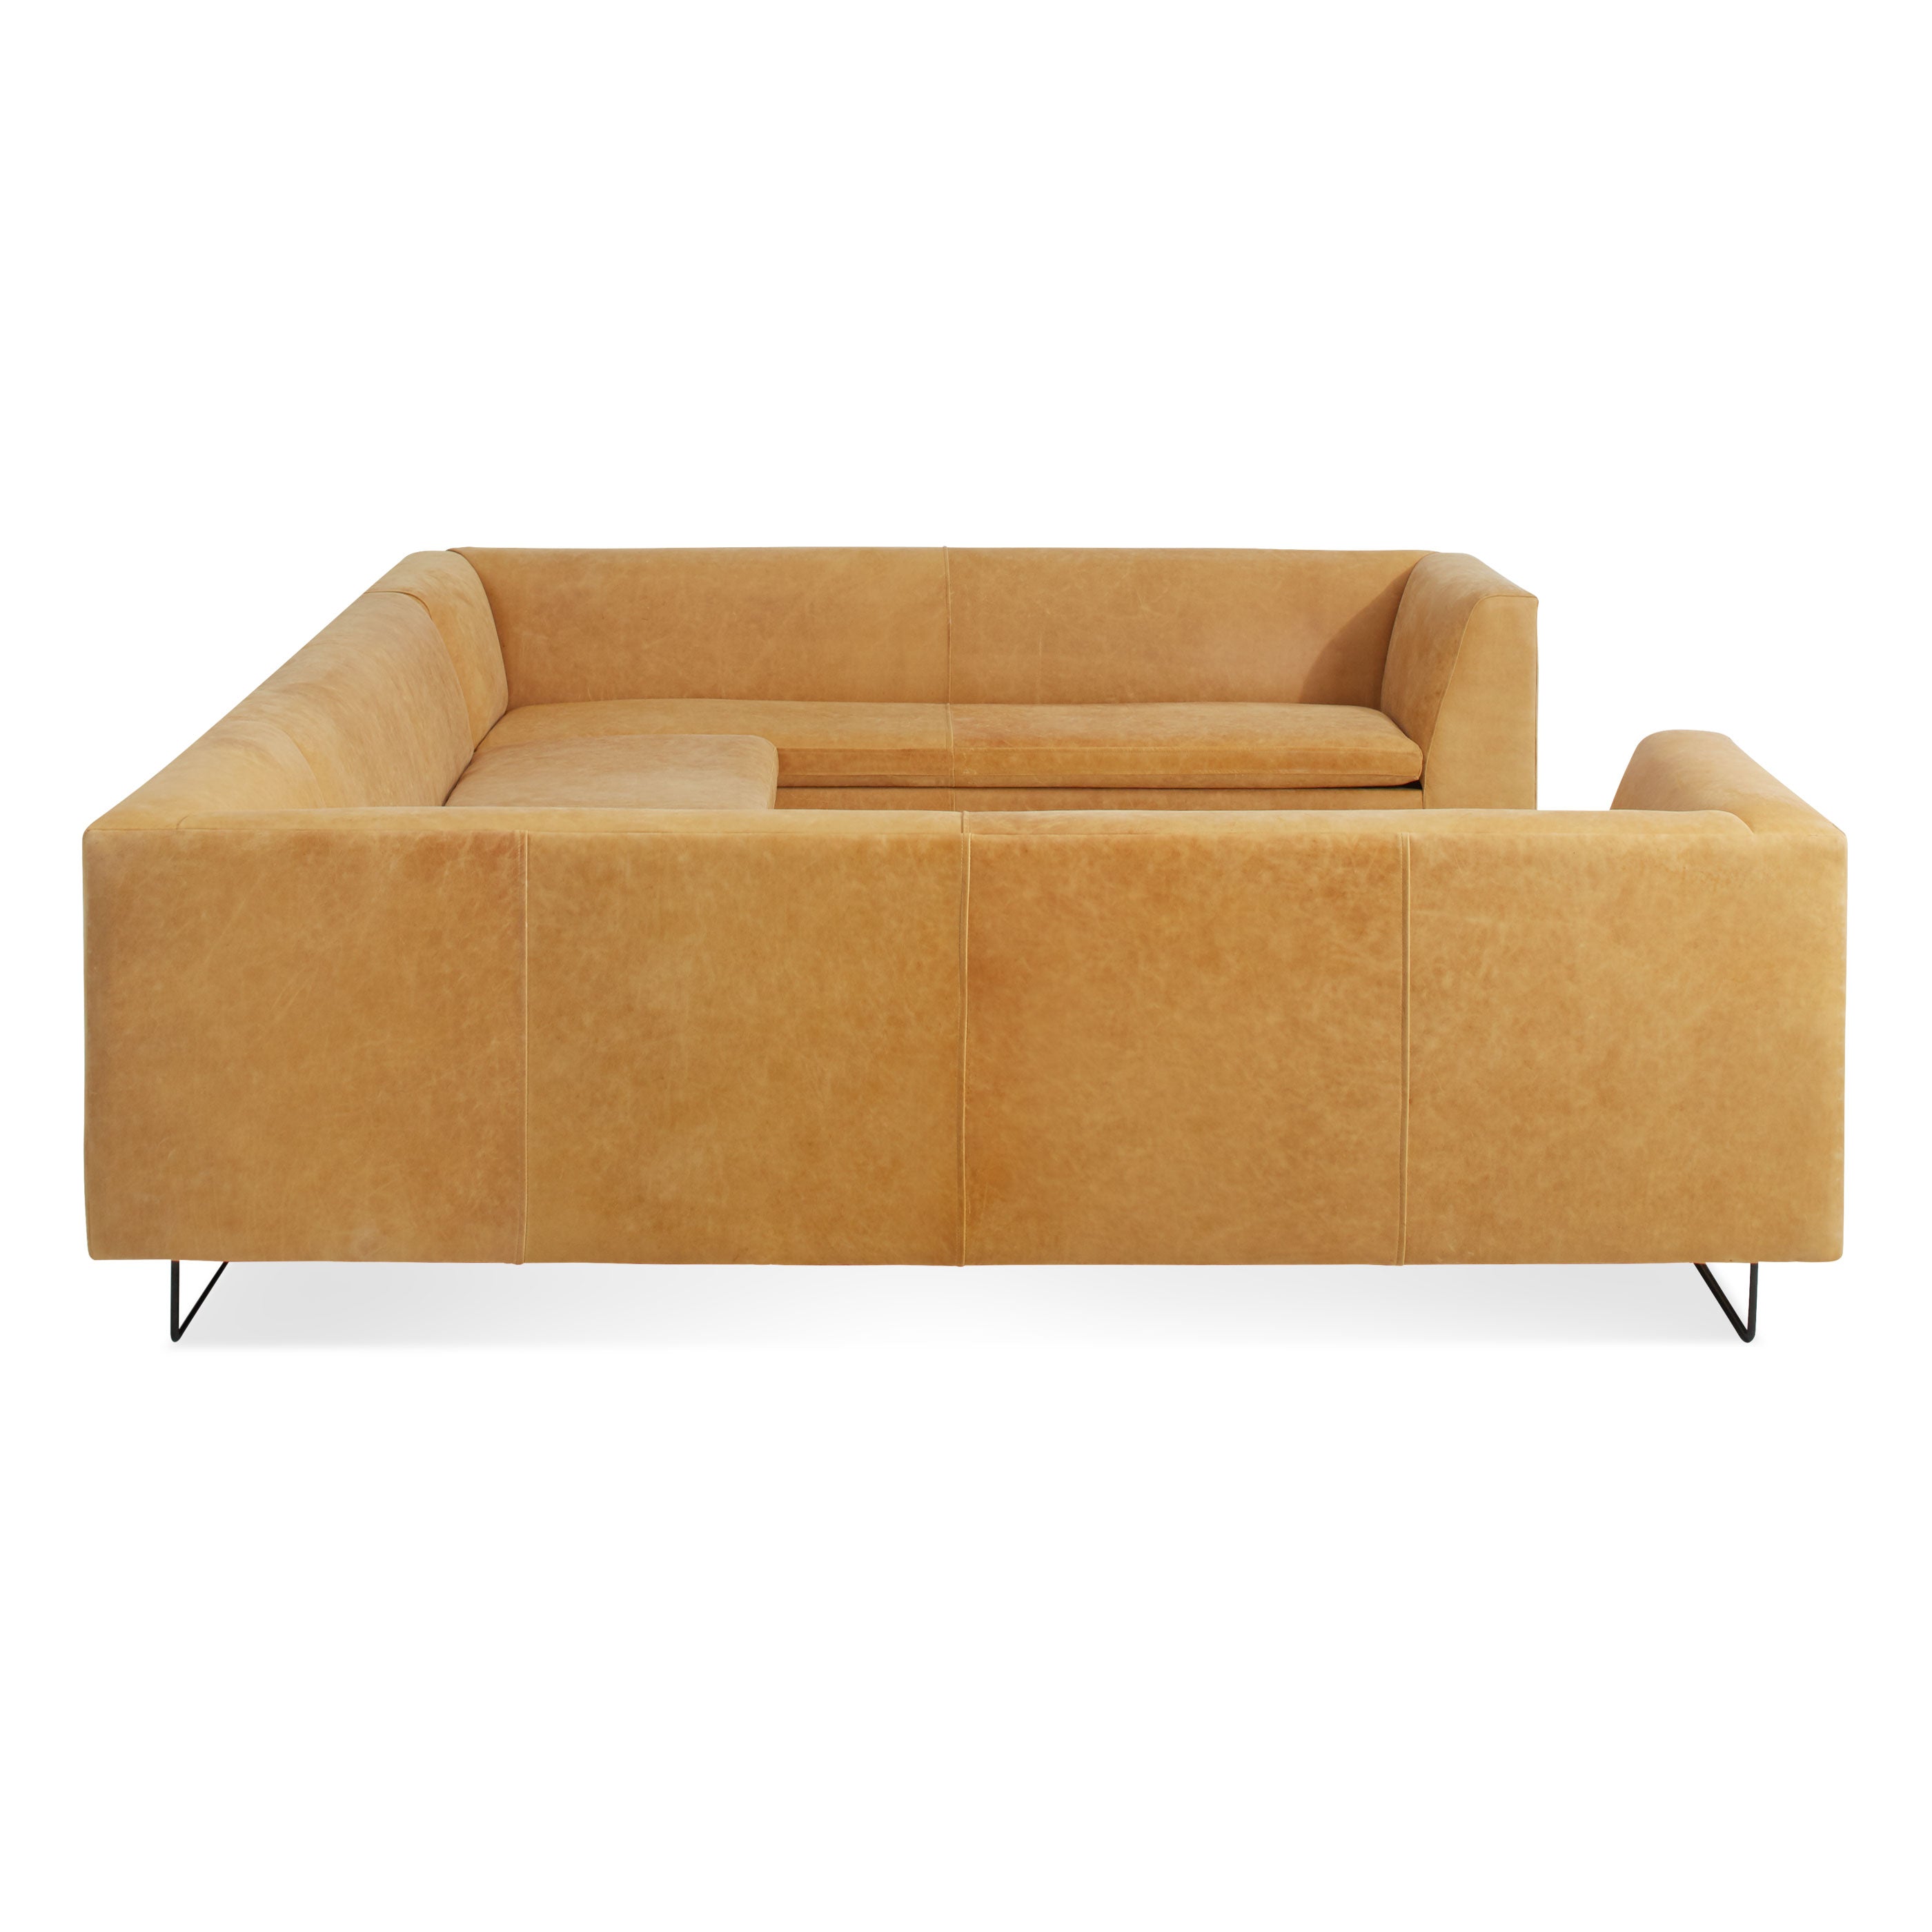 Bonnie and Clyde 133" Leather U-Shape Sectional Sofa